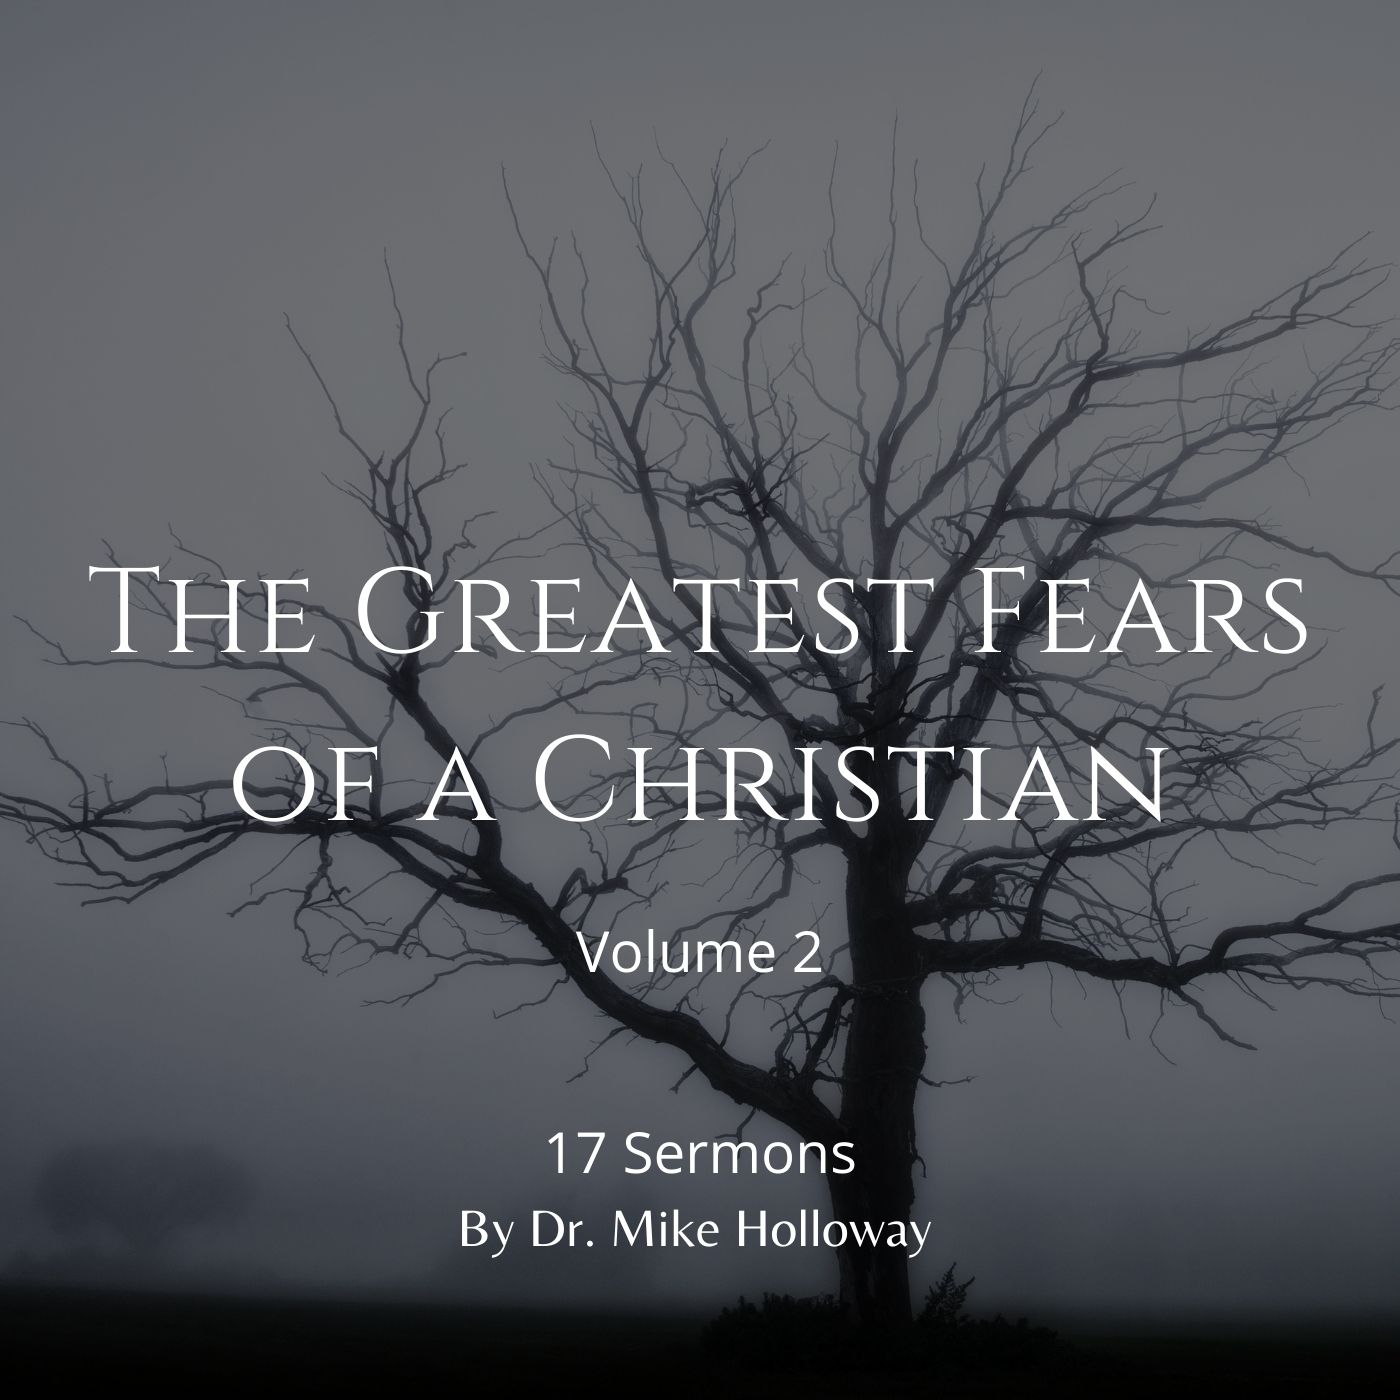 The Greatest Fears of a Christian – Volume 2